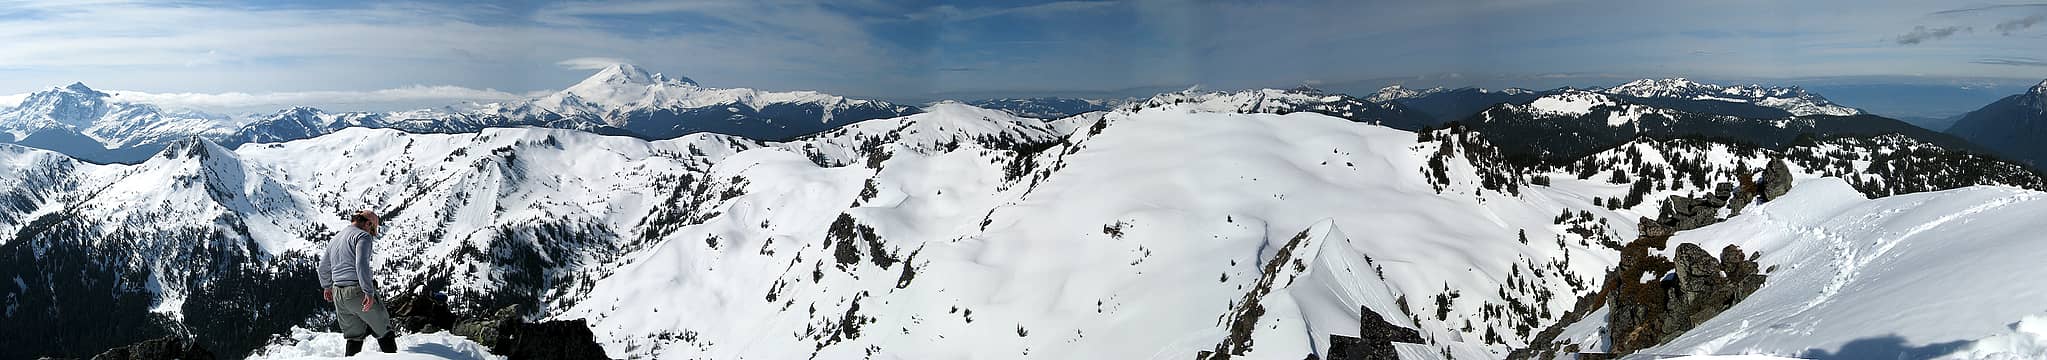 180 degree pan of the summit area